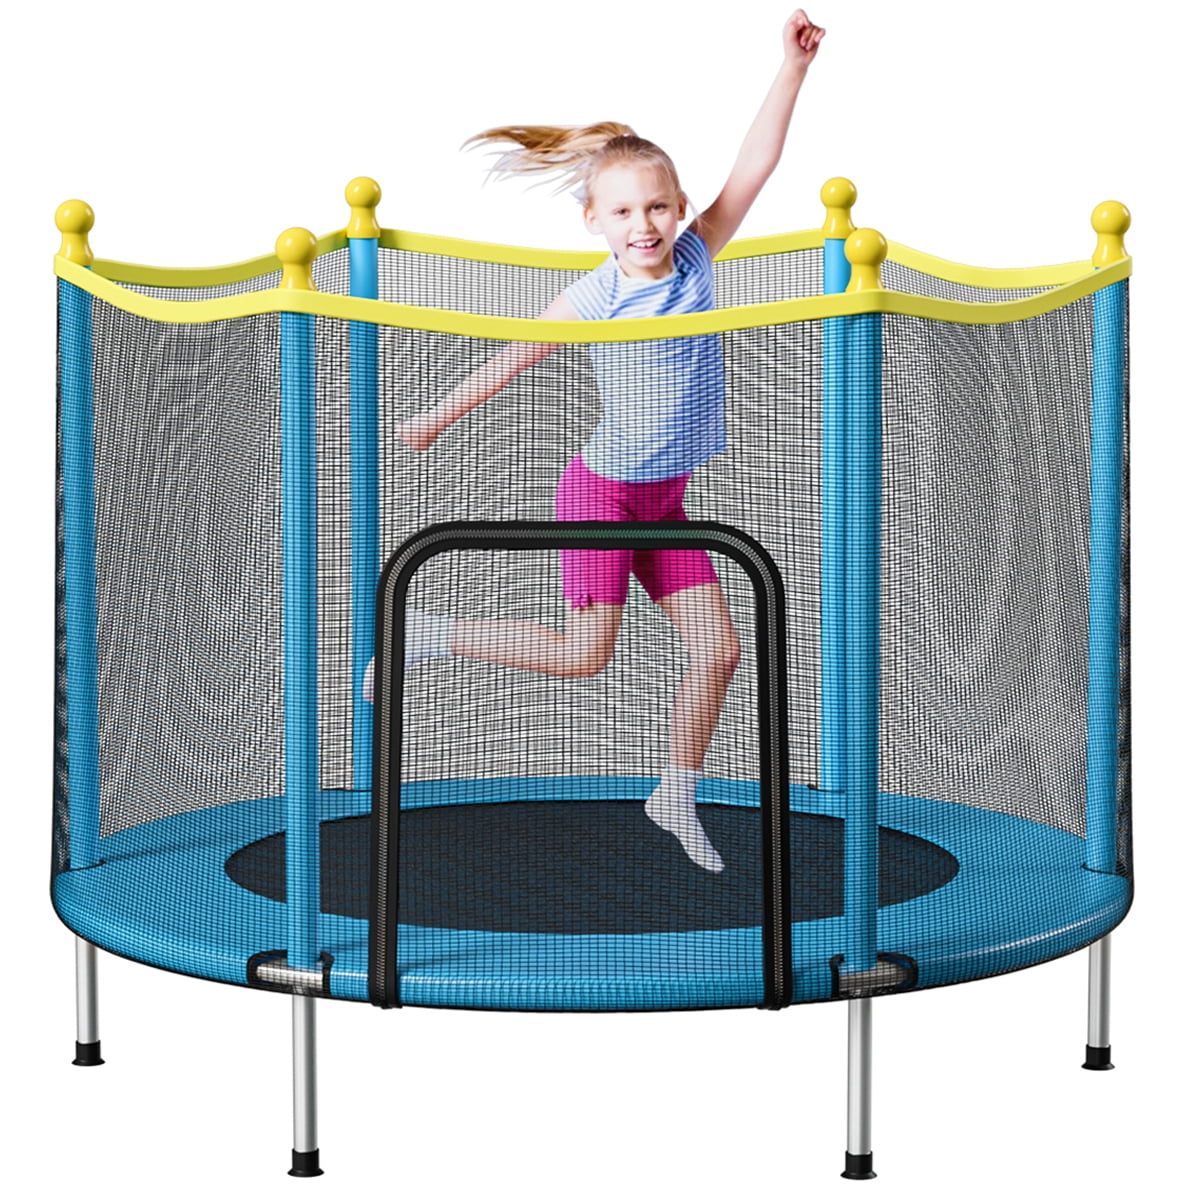 54 Inch Large Kids Trampoline with Mesh Enclosure,Toddler Enclosed Trampoline Children Bouncing Exercise Jumping Bed,Support Up to 220Lb, Best Gift for Kids